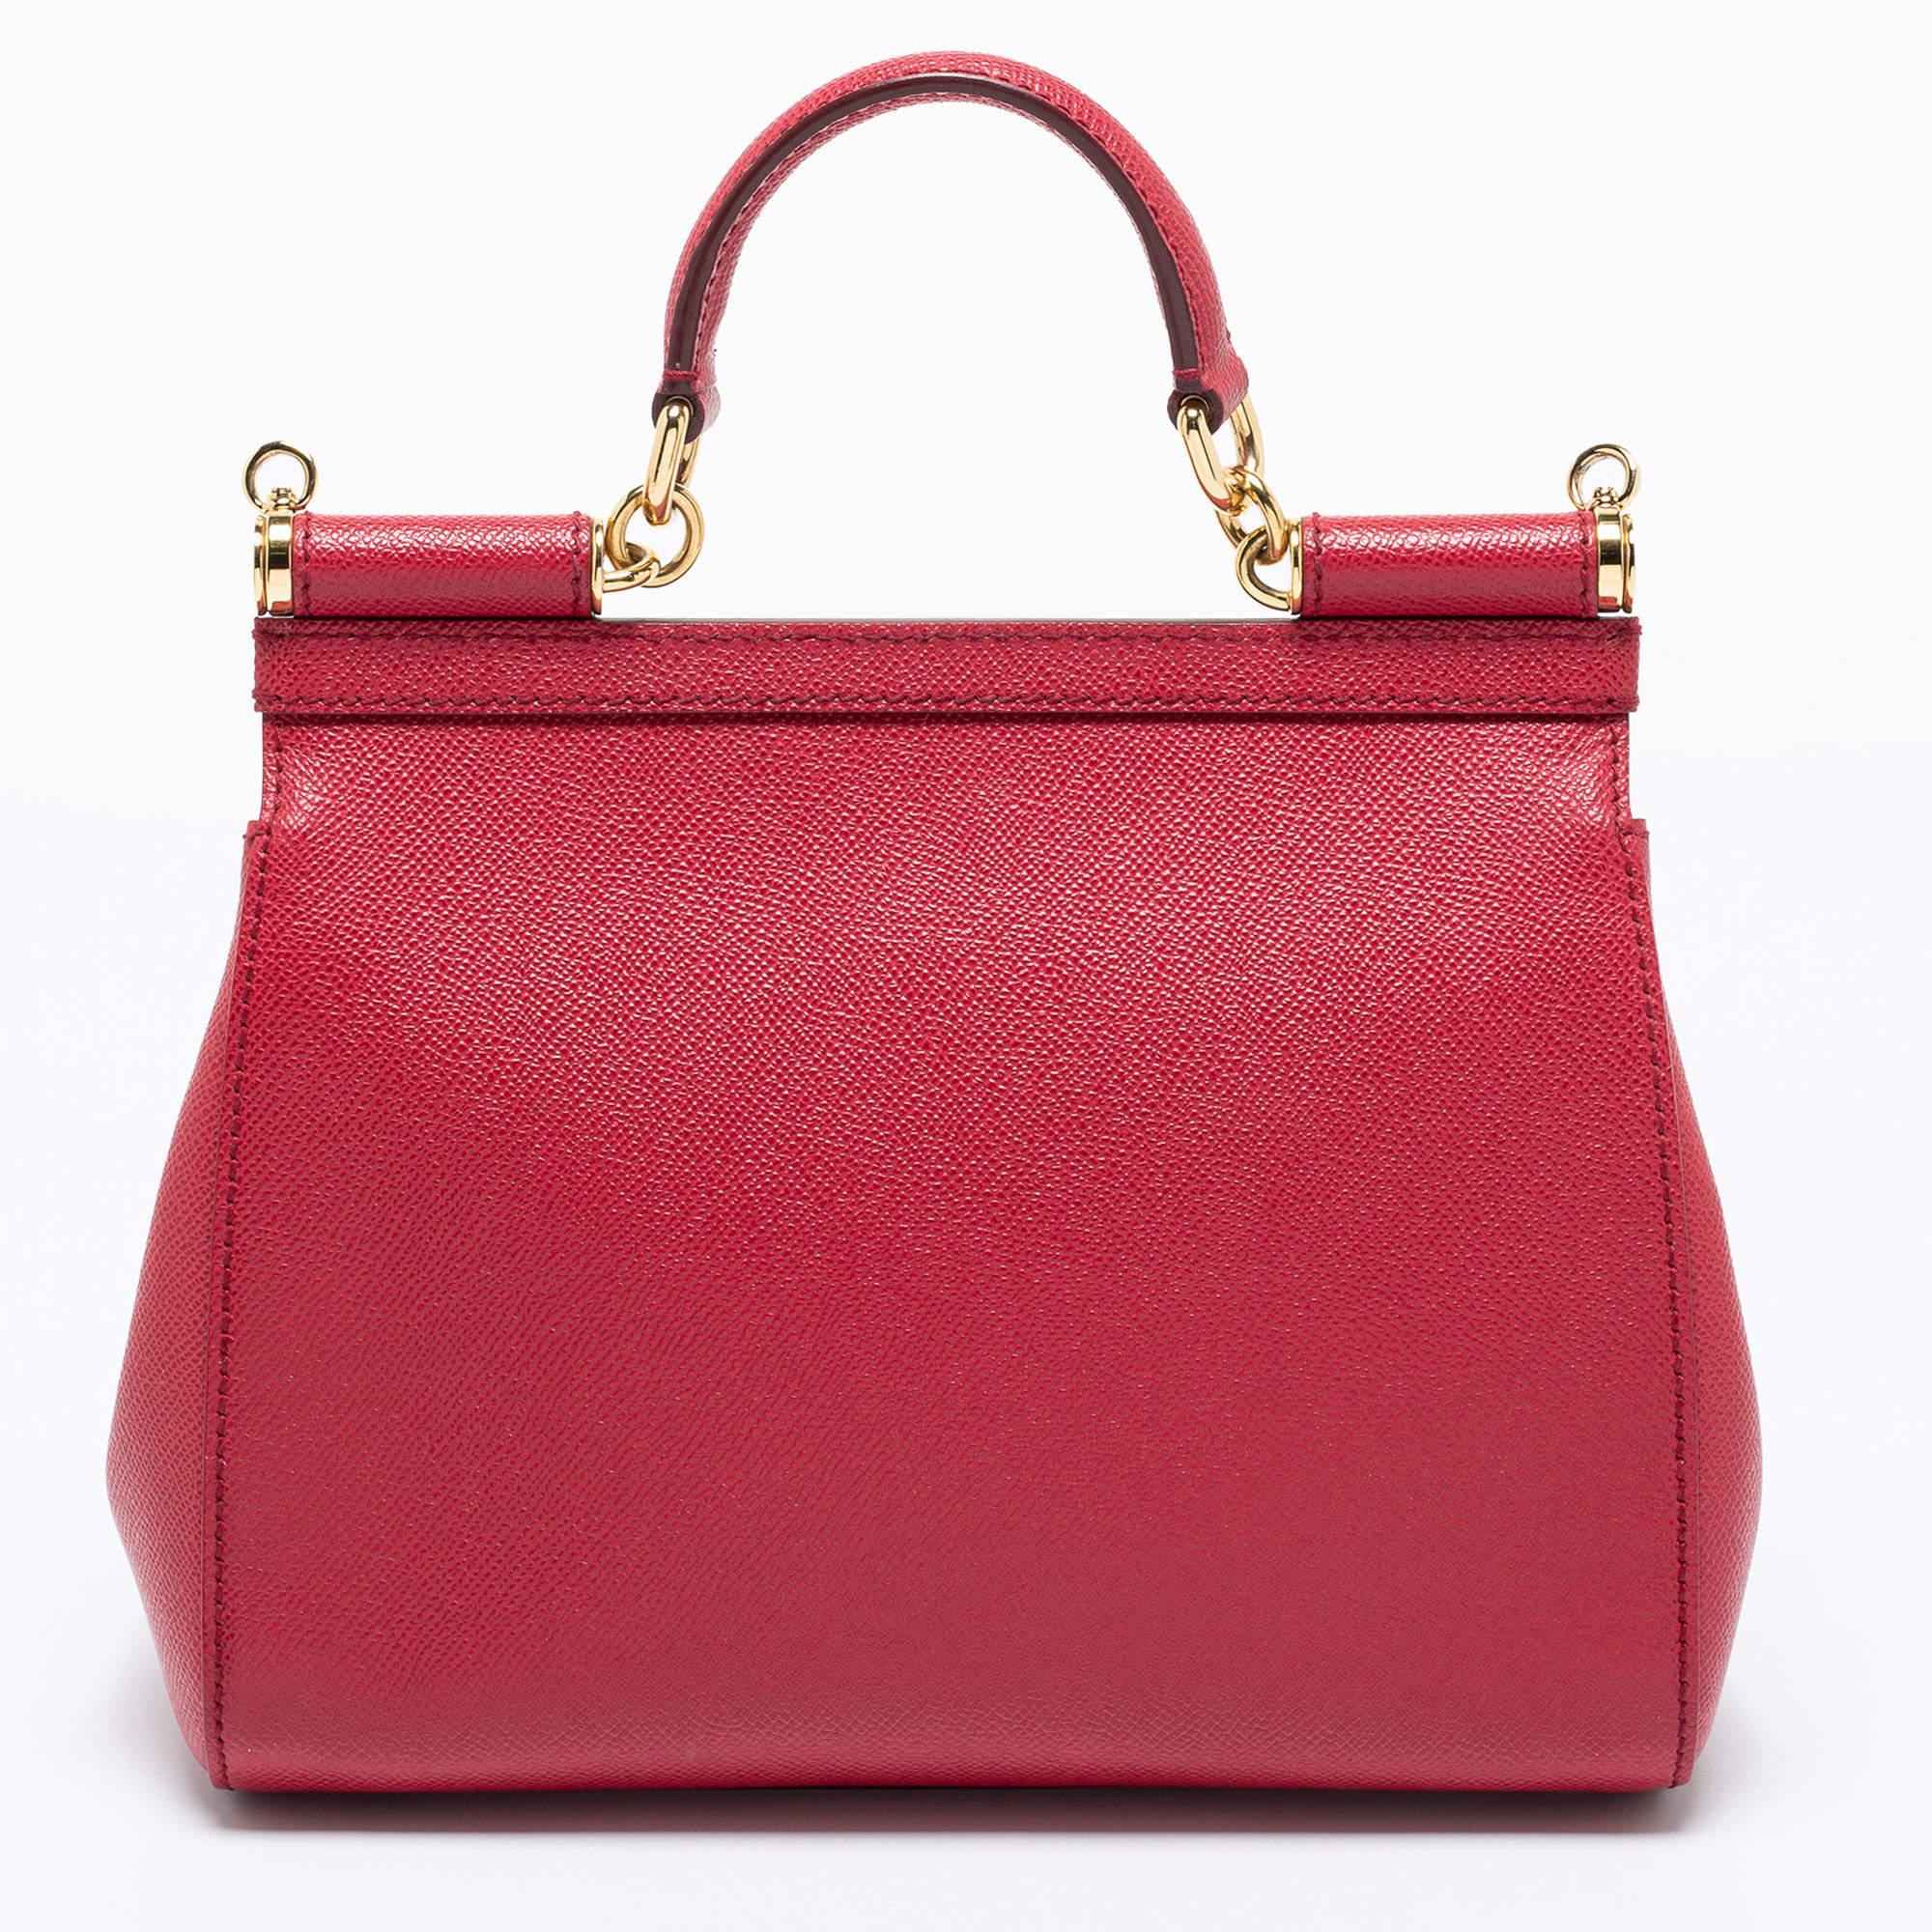 Beautiful with intricate details, this red Miss Sicily bag by Dolce & Gabbana will get you through all seasons. The exterior is made from red leather, and the bag features a top handle, shoulder strap, and a spacious interior.

Includes: Strap